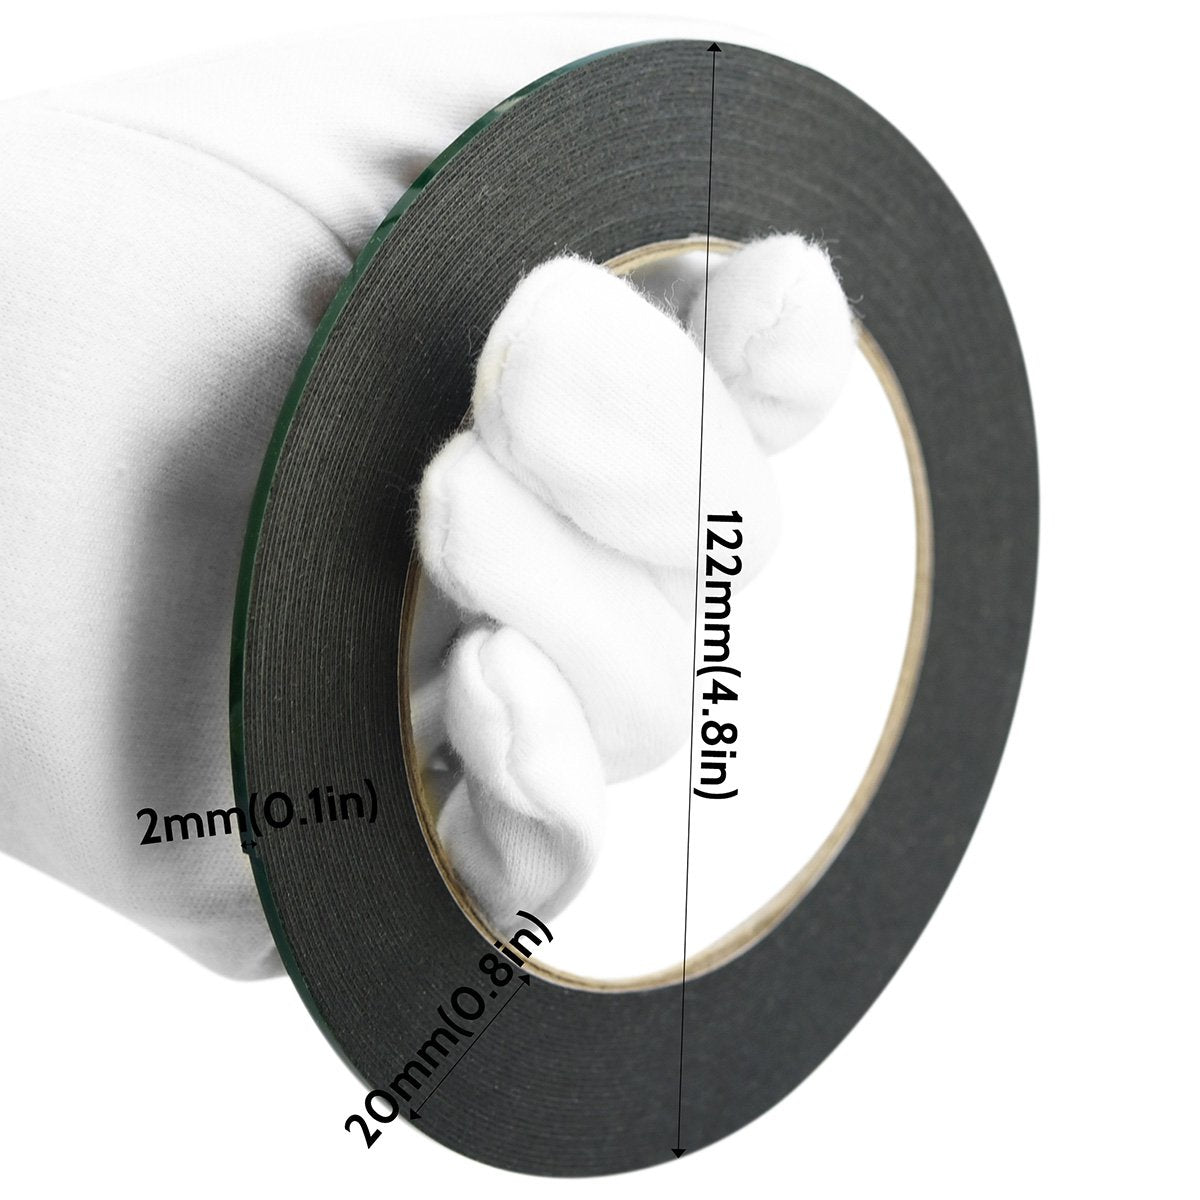 Phone Repair Double Sided Black Foam Tape with Green Backing / Self-Adhesive Tape